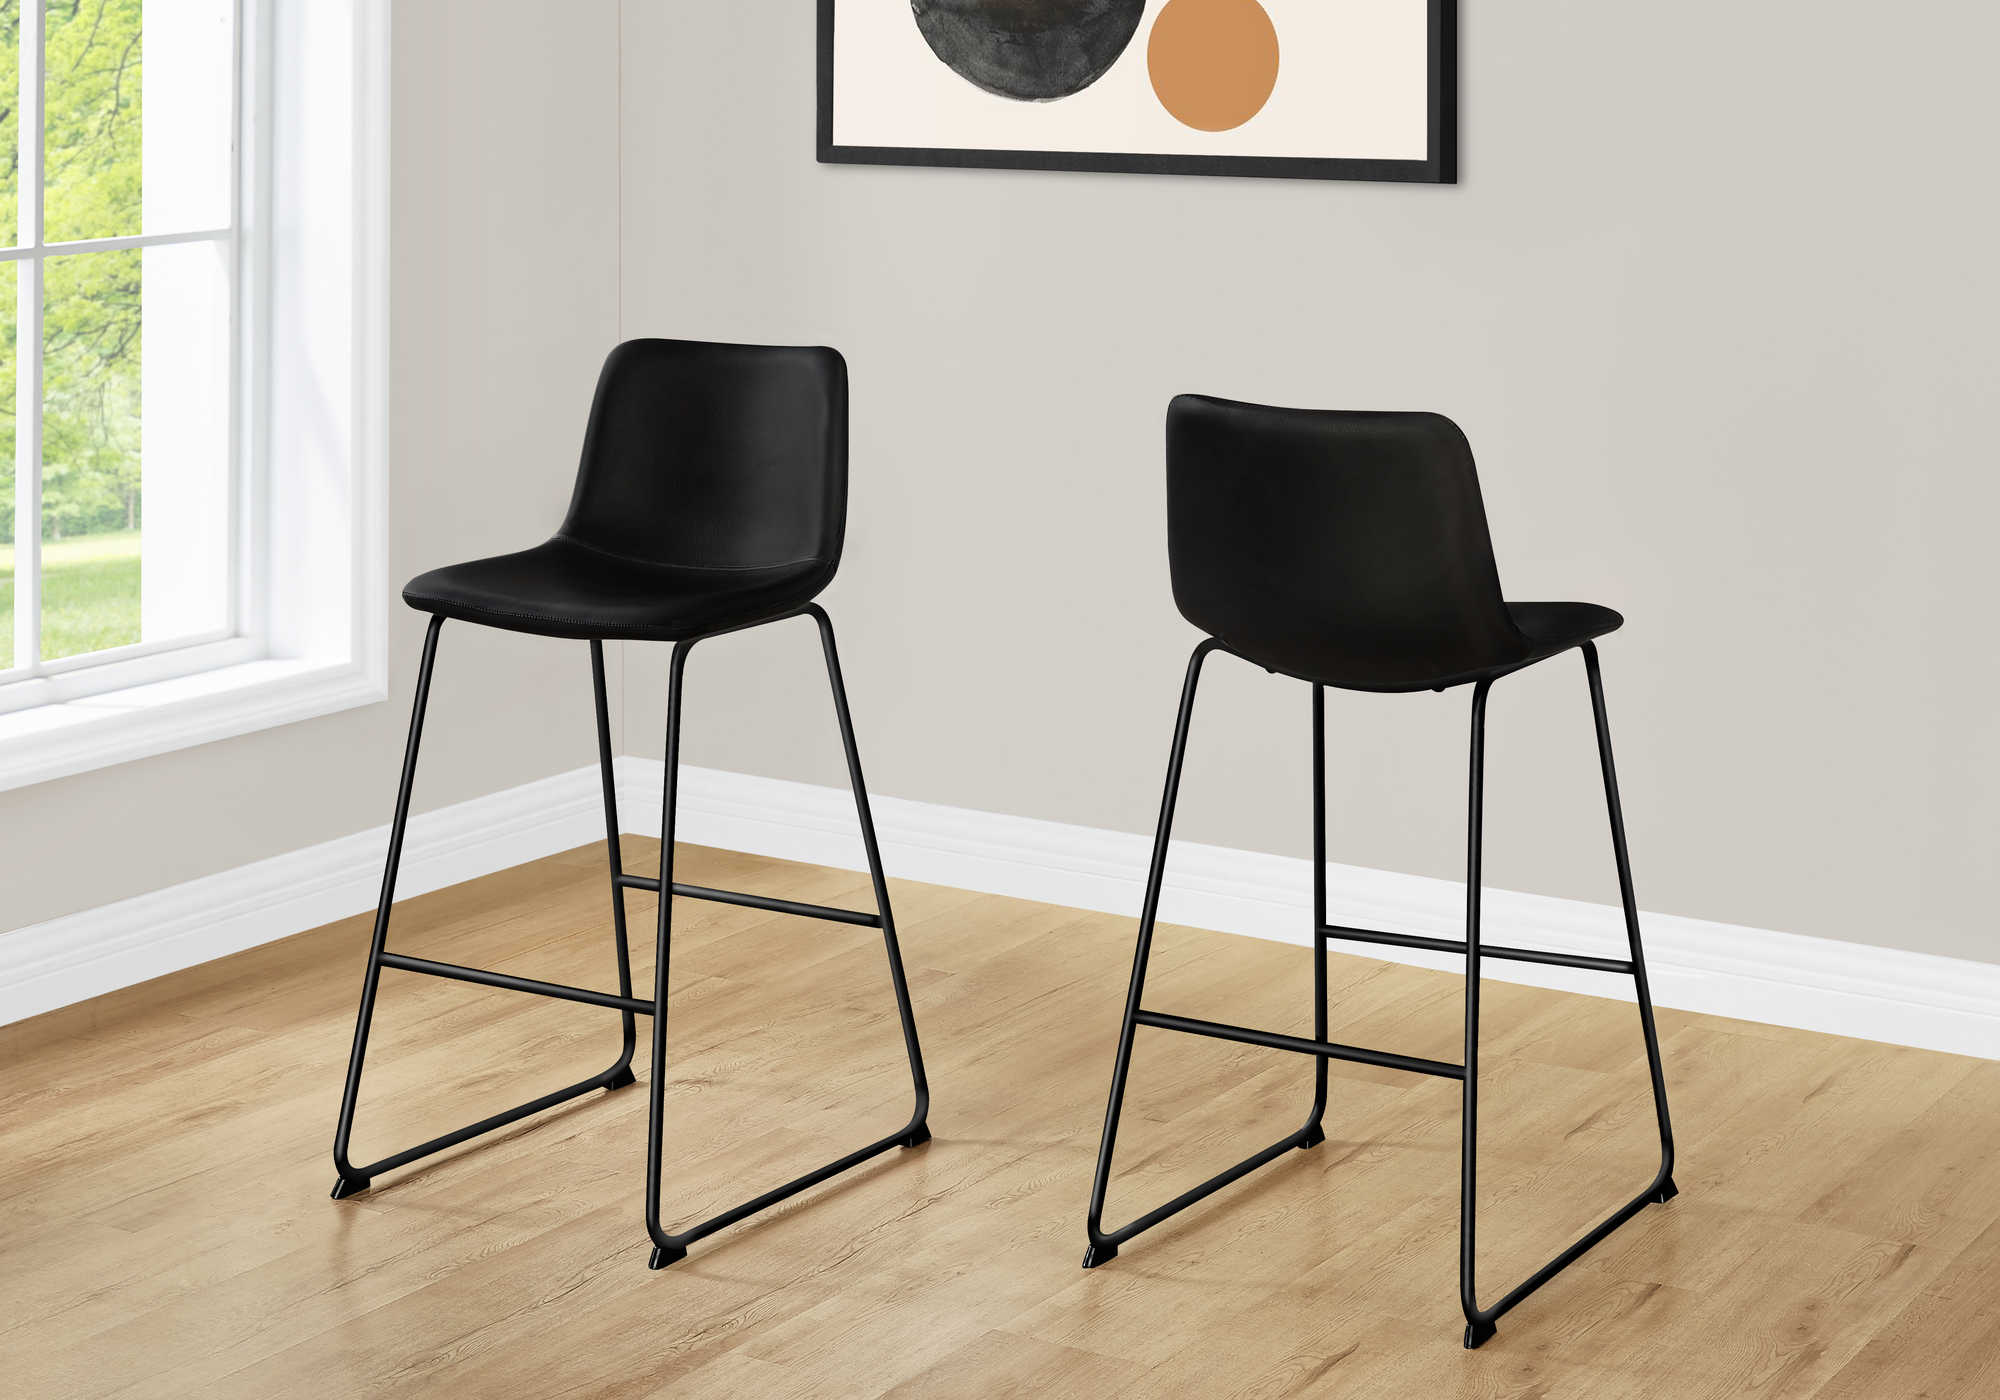 OFFICE CHAIR - BLACK LEATHER-LOOK / STAND-UP DESK